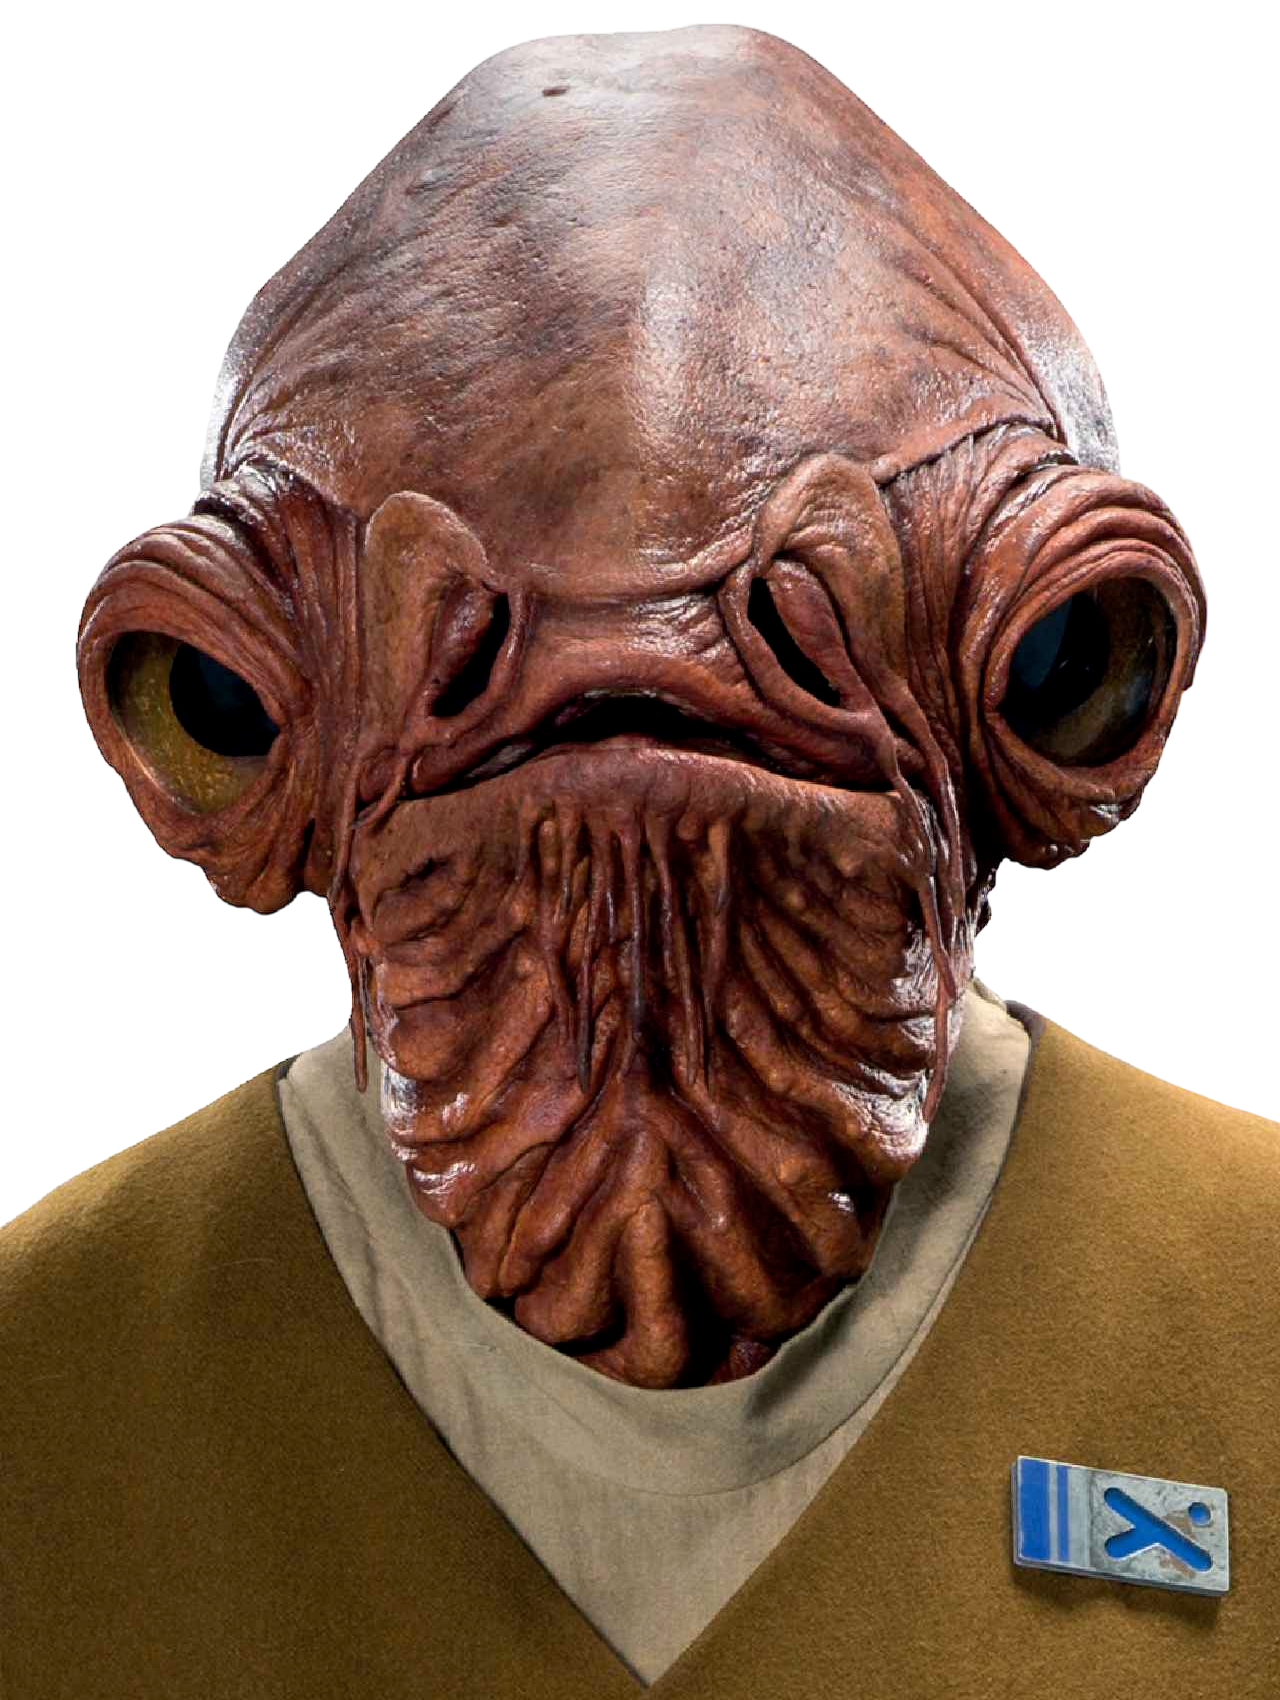 Who is Admiral Ackbar?